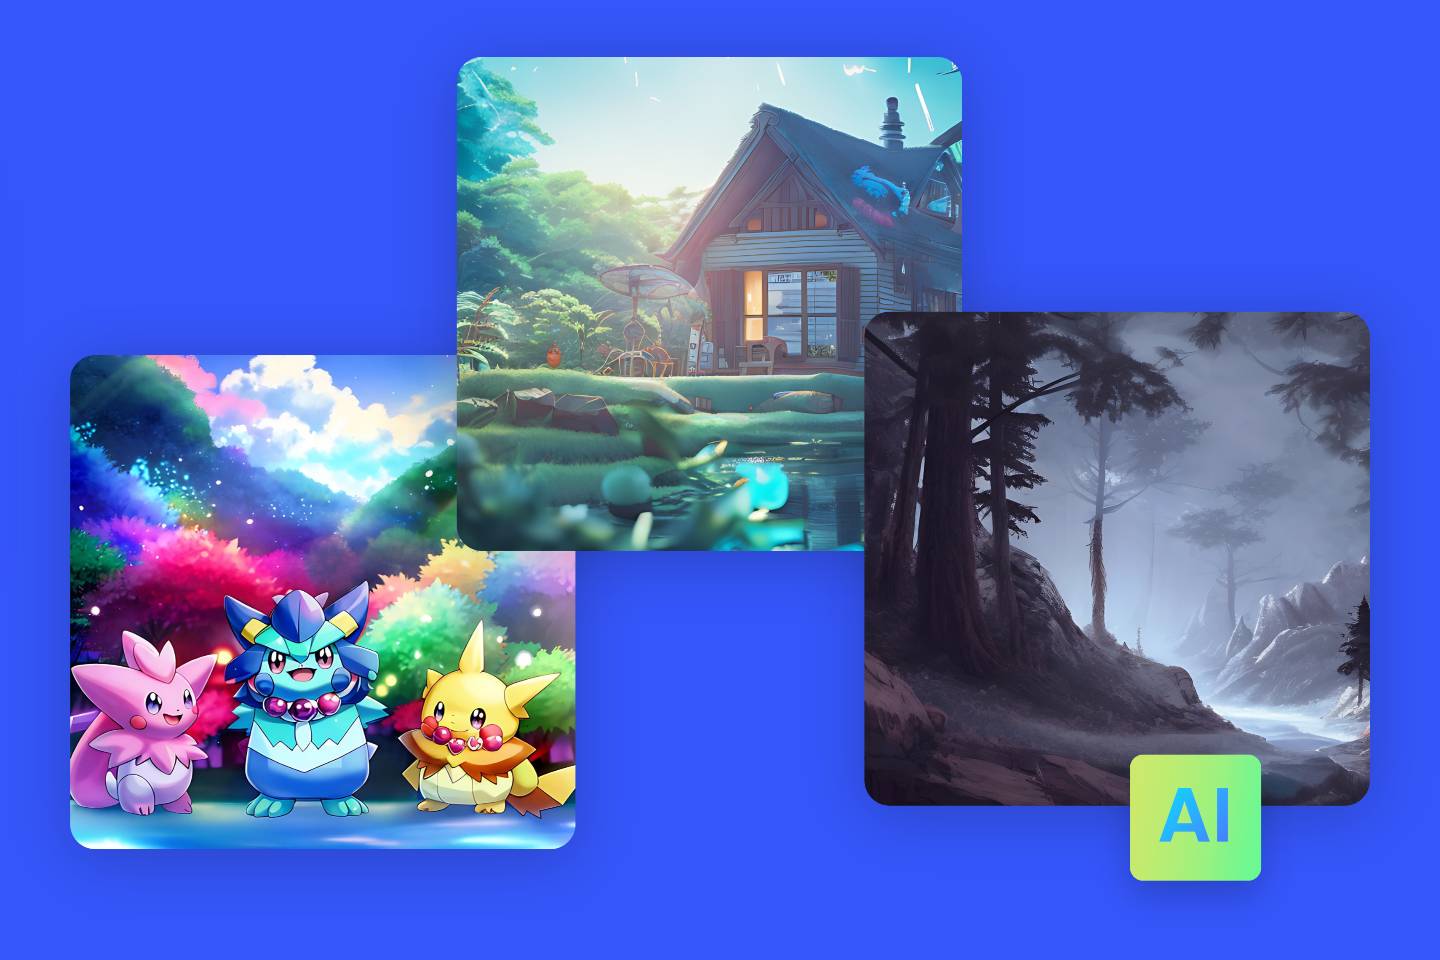 Pokemon forest and canbin ai paintings from fotor ai image generator